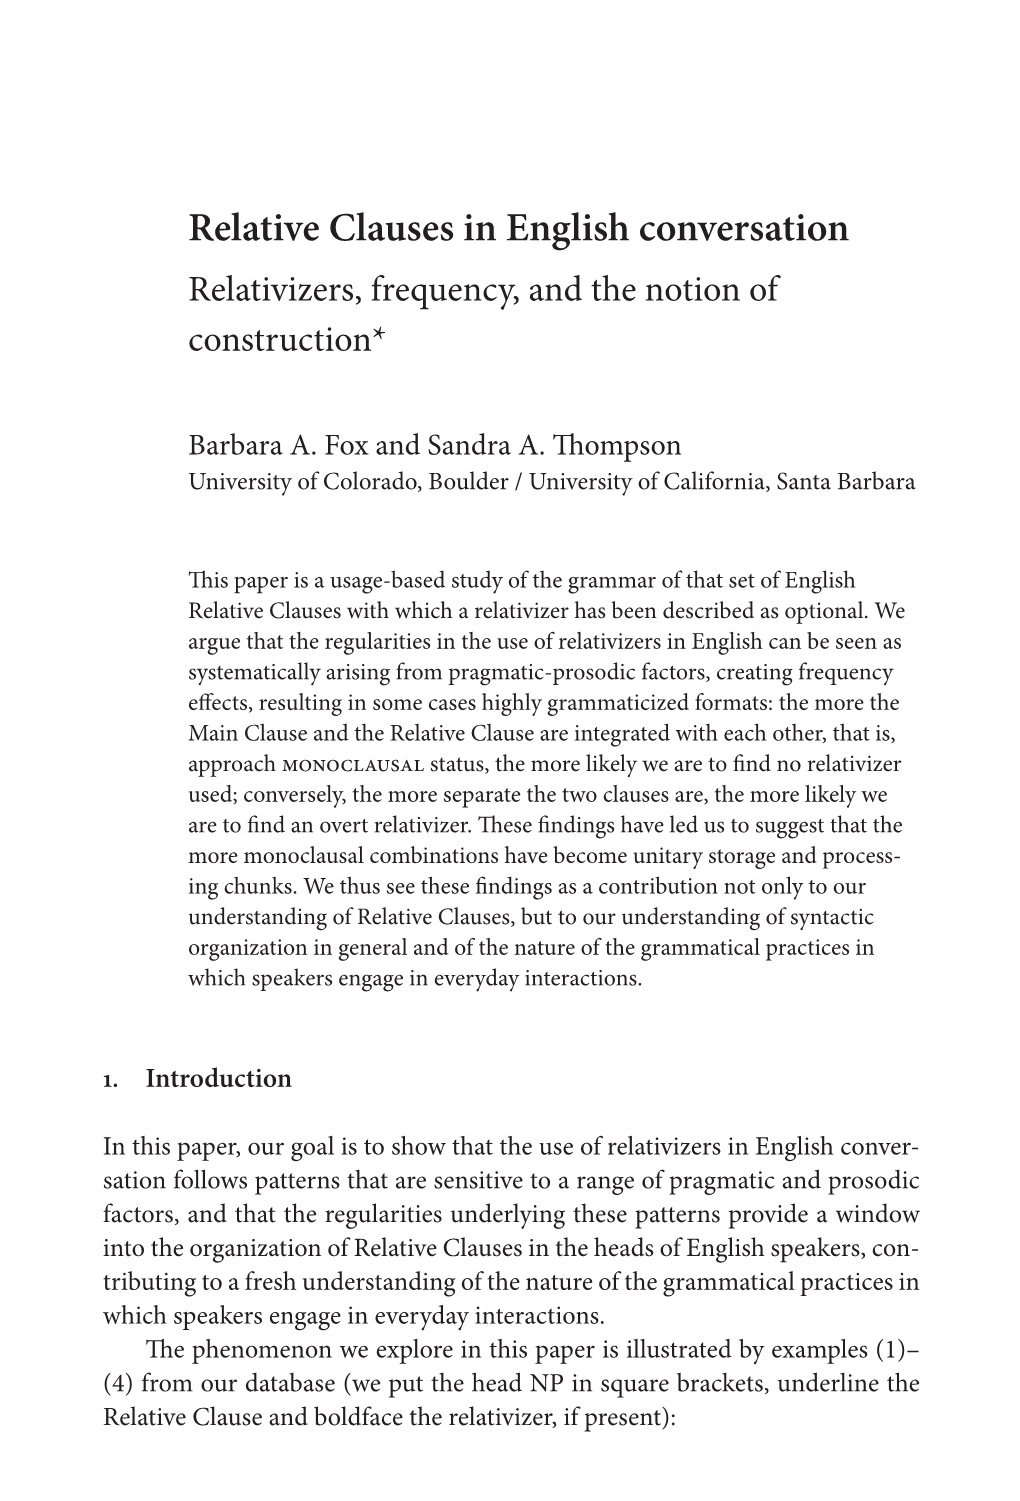 Relative Clauses in English Conversation Relativizers, Frequency, and the Notion of Construction*